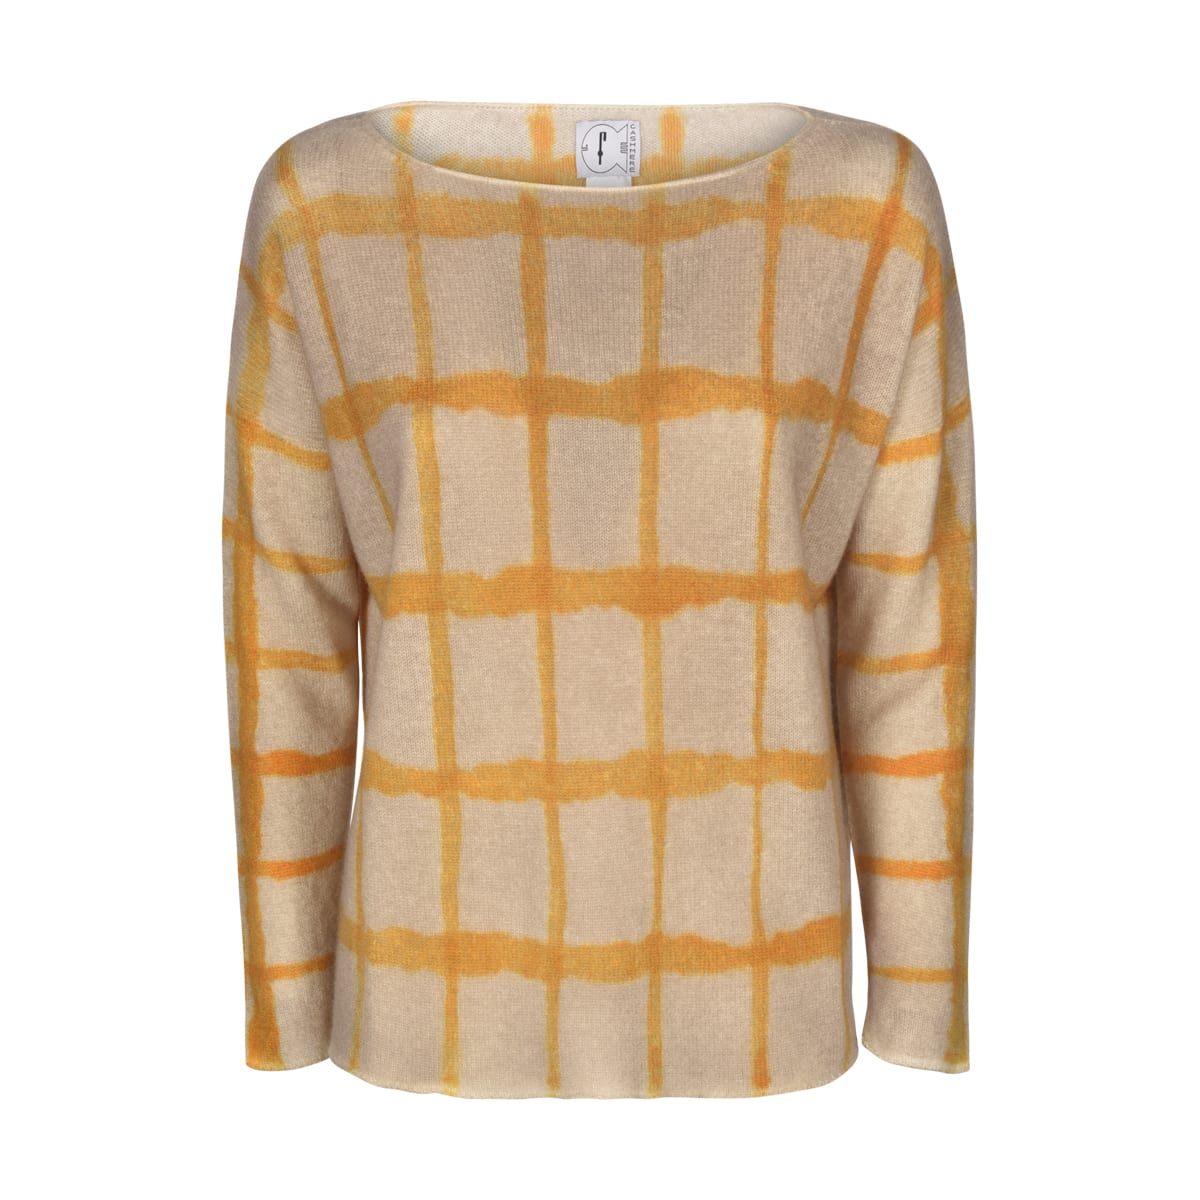 f cashmere Check Patterned Sweater